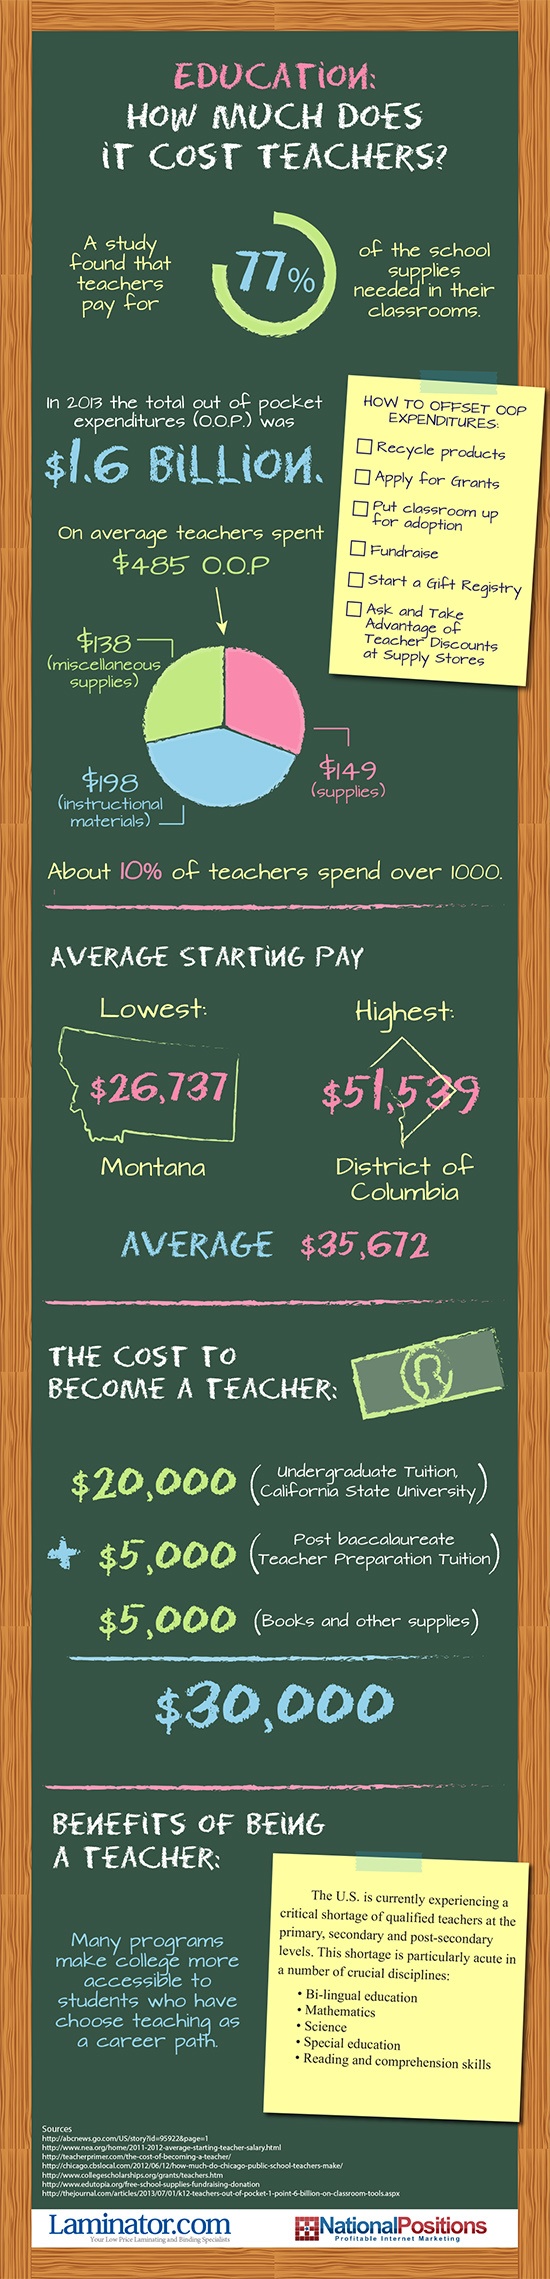 How Much Does Education Cost Teachers Infographic